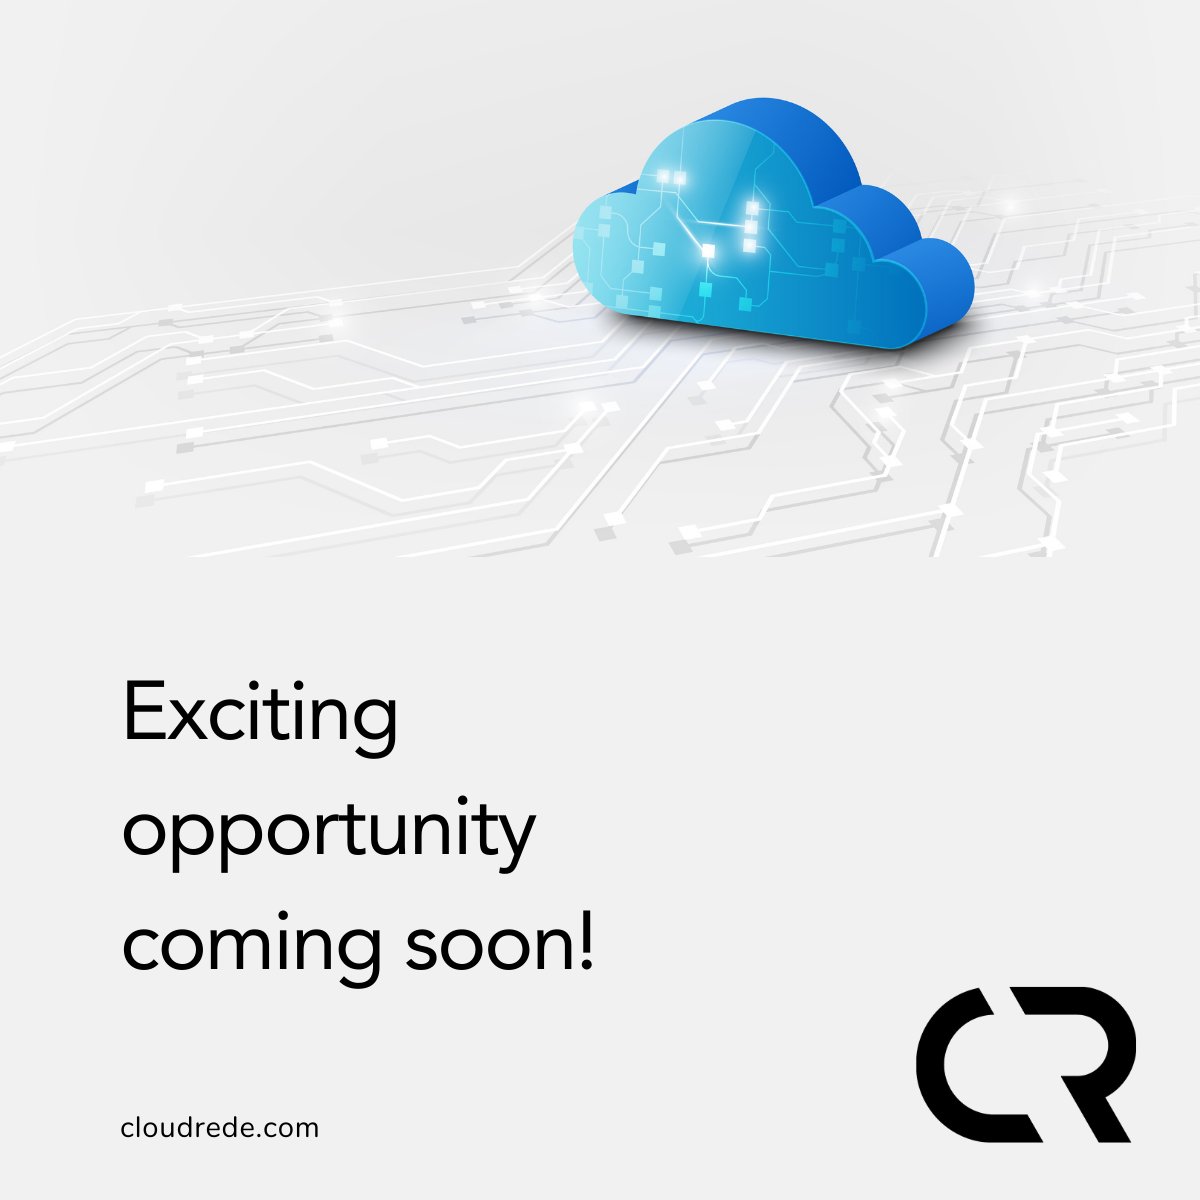 Exciting opportunity #comingsoon! Thanks to the hard work of our incredible team and the support of our valued customers, we're gearing up to welcome a new face to the team! Stay tuned for updates! 🌟👀 #CloudRede #GrowingTeam #NewOpportunity